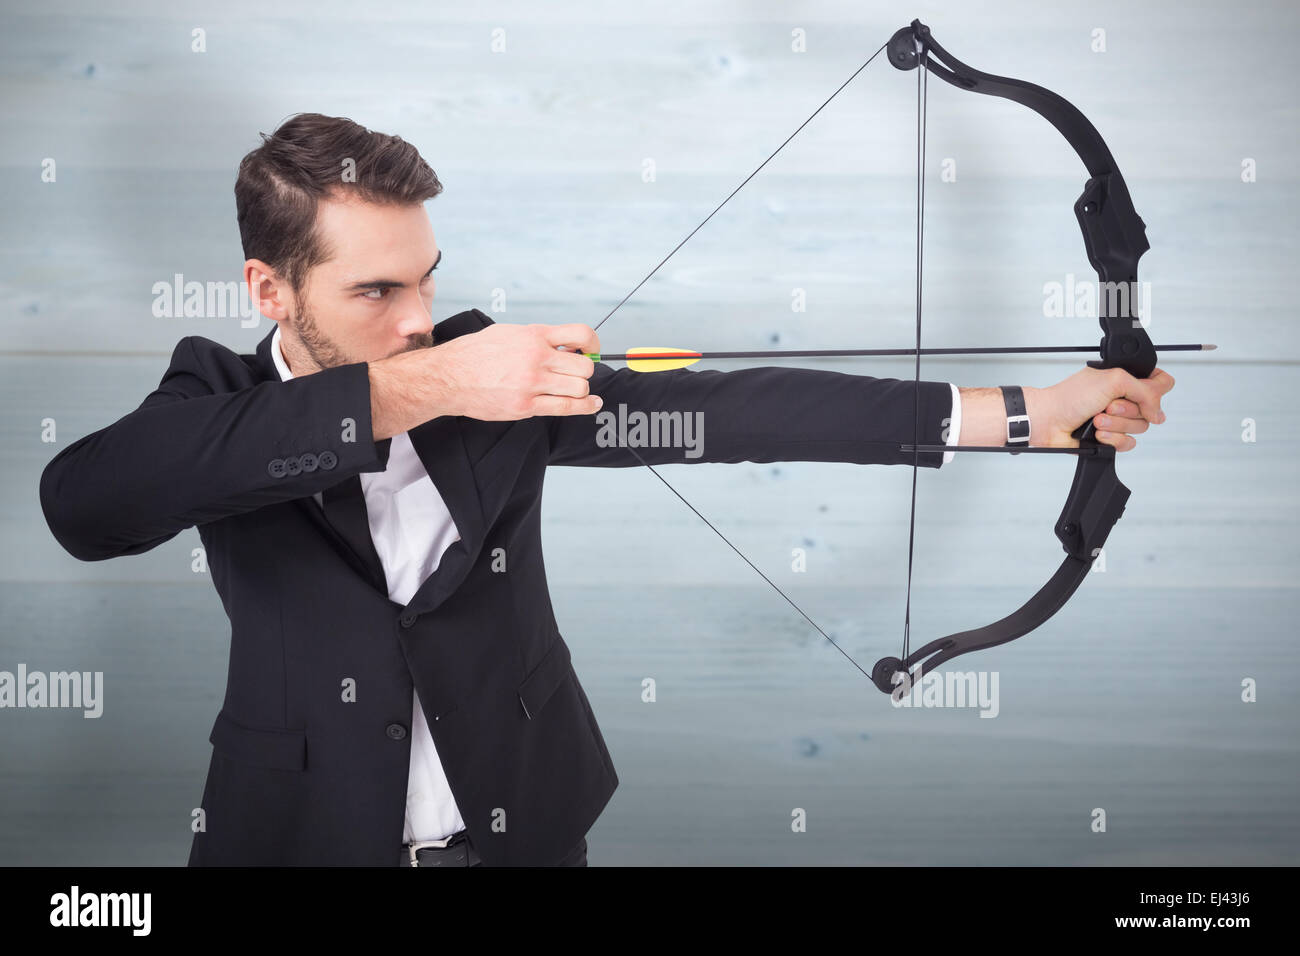 Composite image of elegant businessman shooting bow and arrow Stock Photo